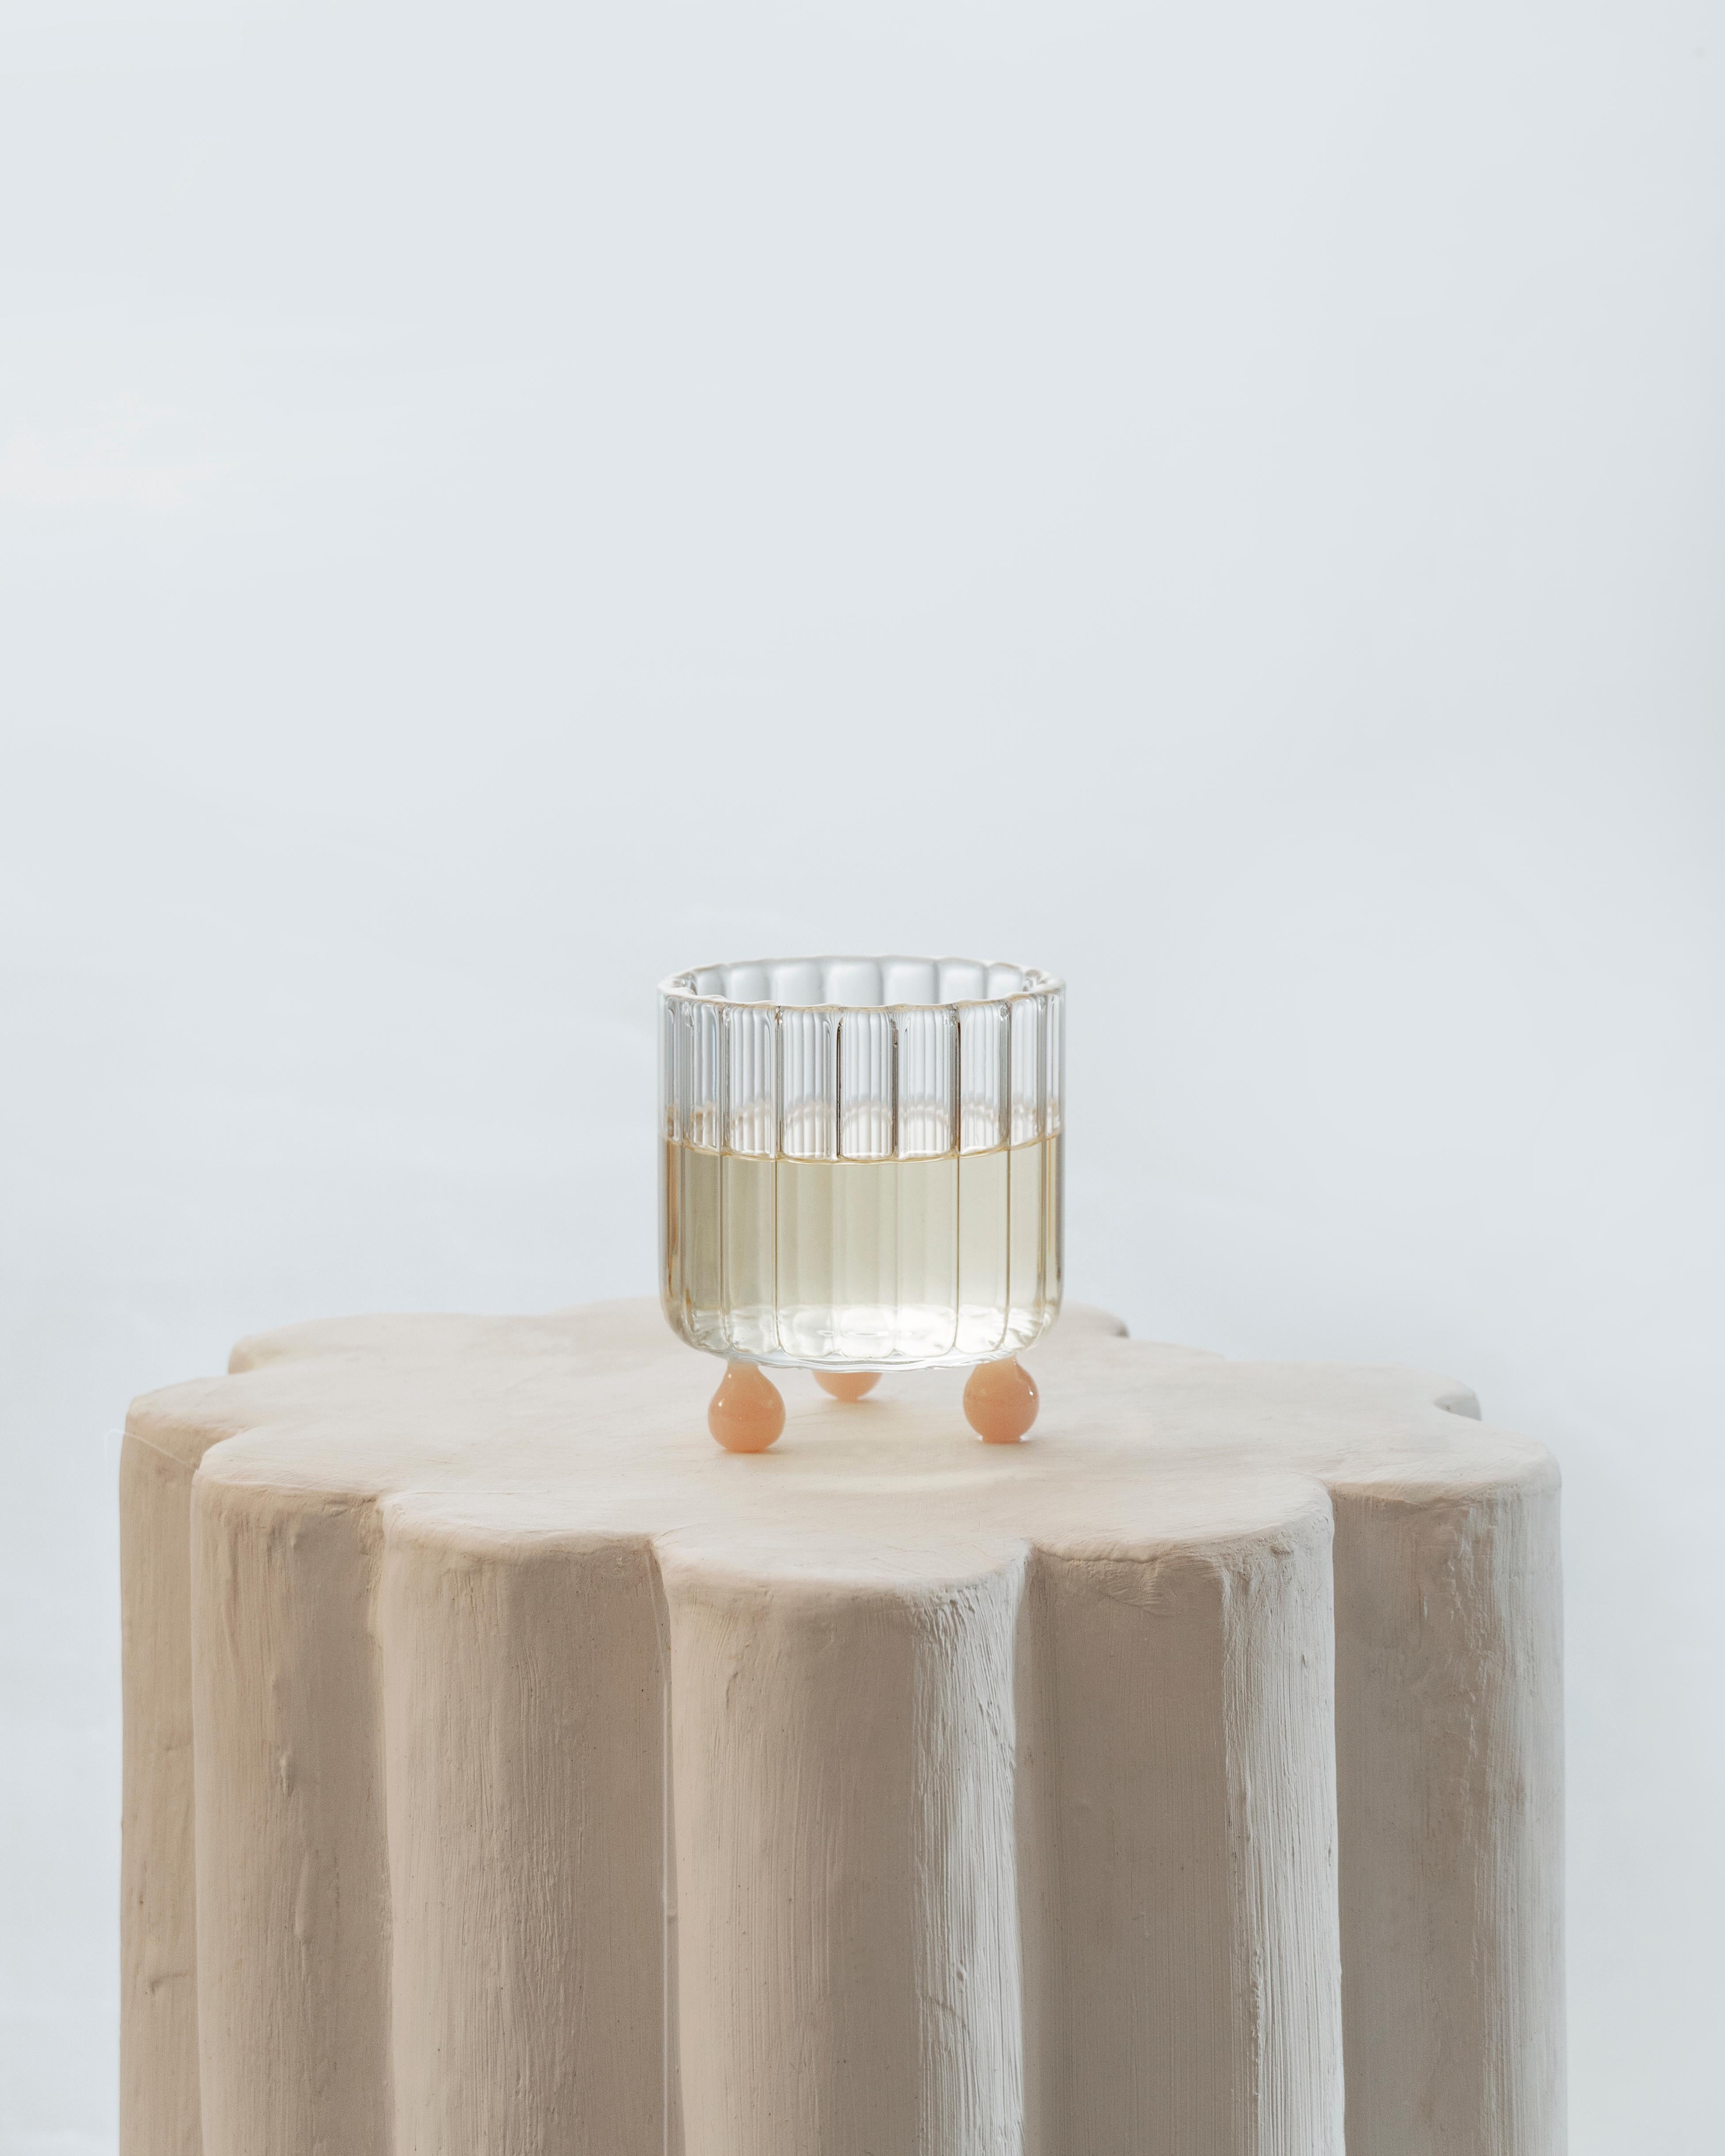 A lowball glass of an atypical shape, inspired by Postmodern architecture. Each piece is handmade in Italy by Master glassblowers, using high-quality borosilicate glass. The ribbed glass body rests on top of three clear spheres, playfully elevating